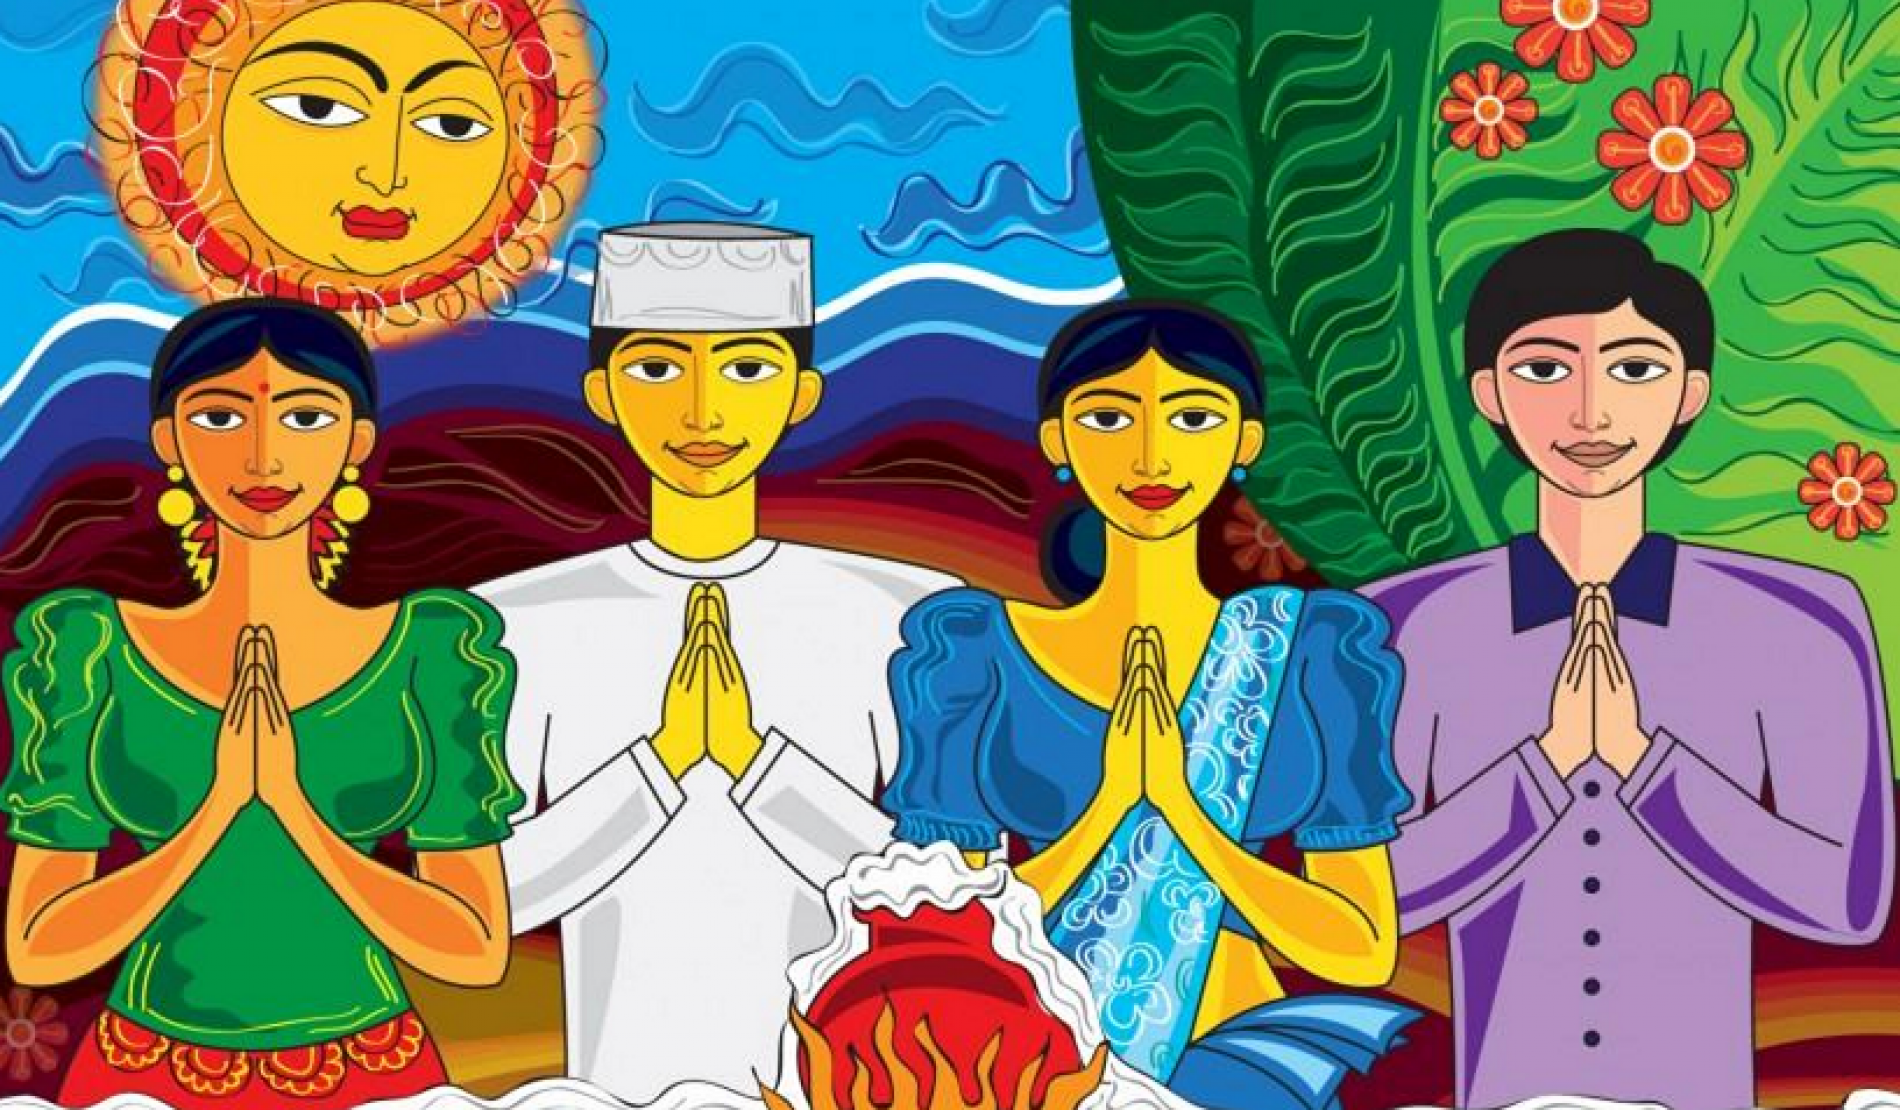 The Best Sinhala & Tamil New Year To You & Yours!